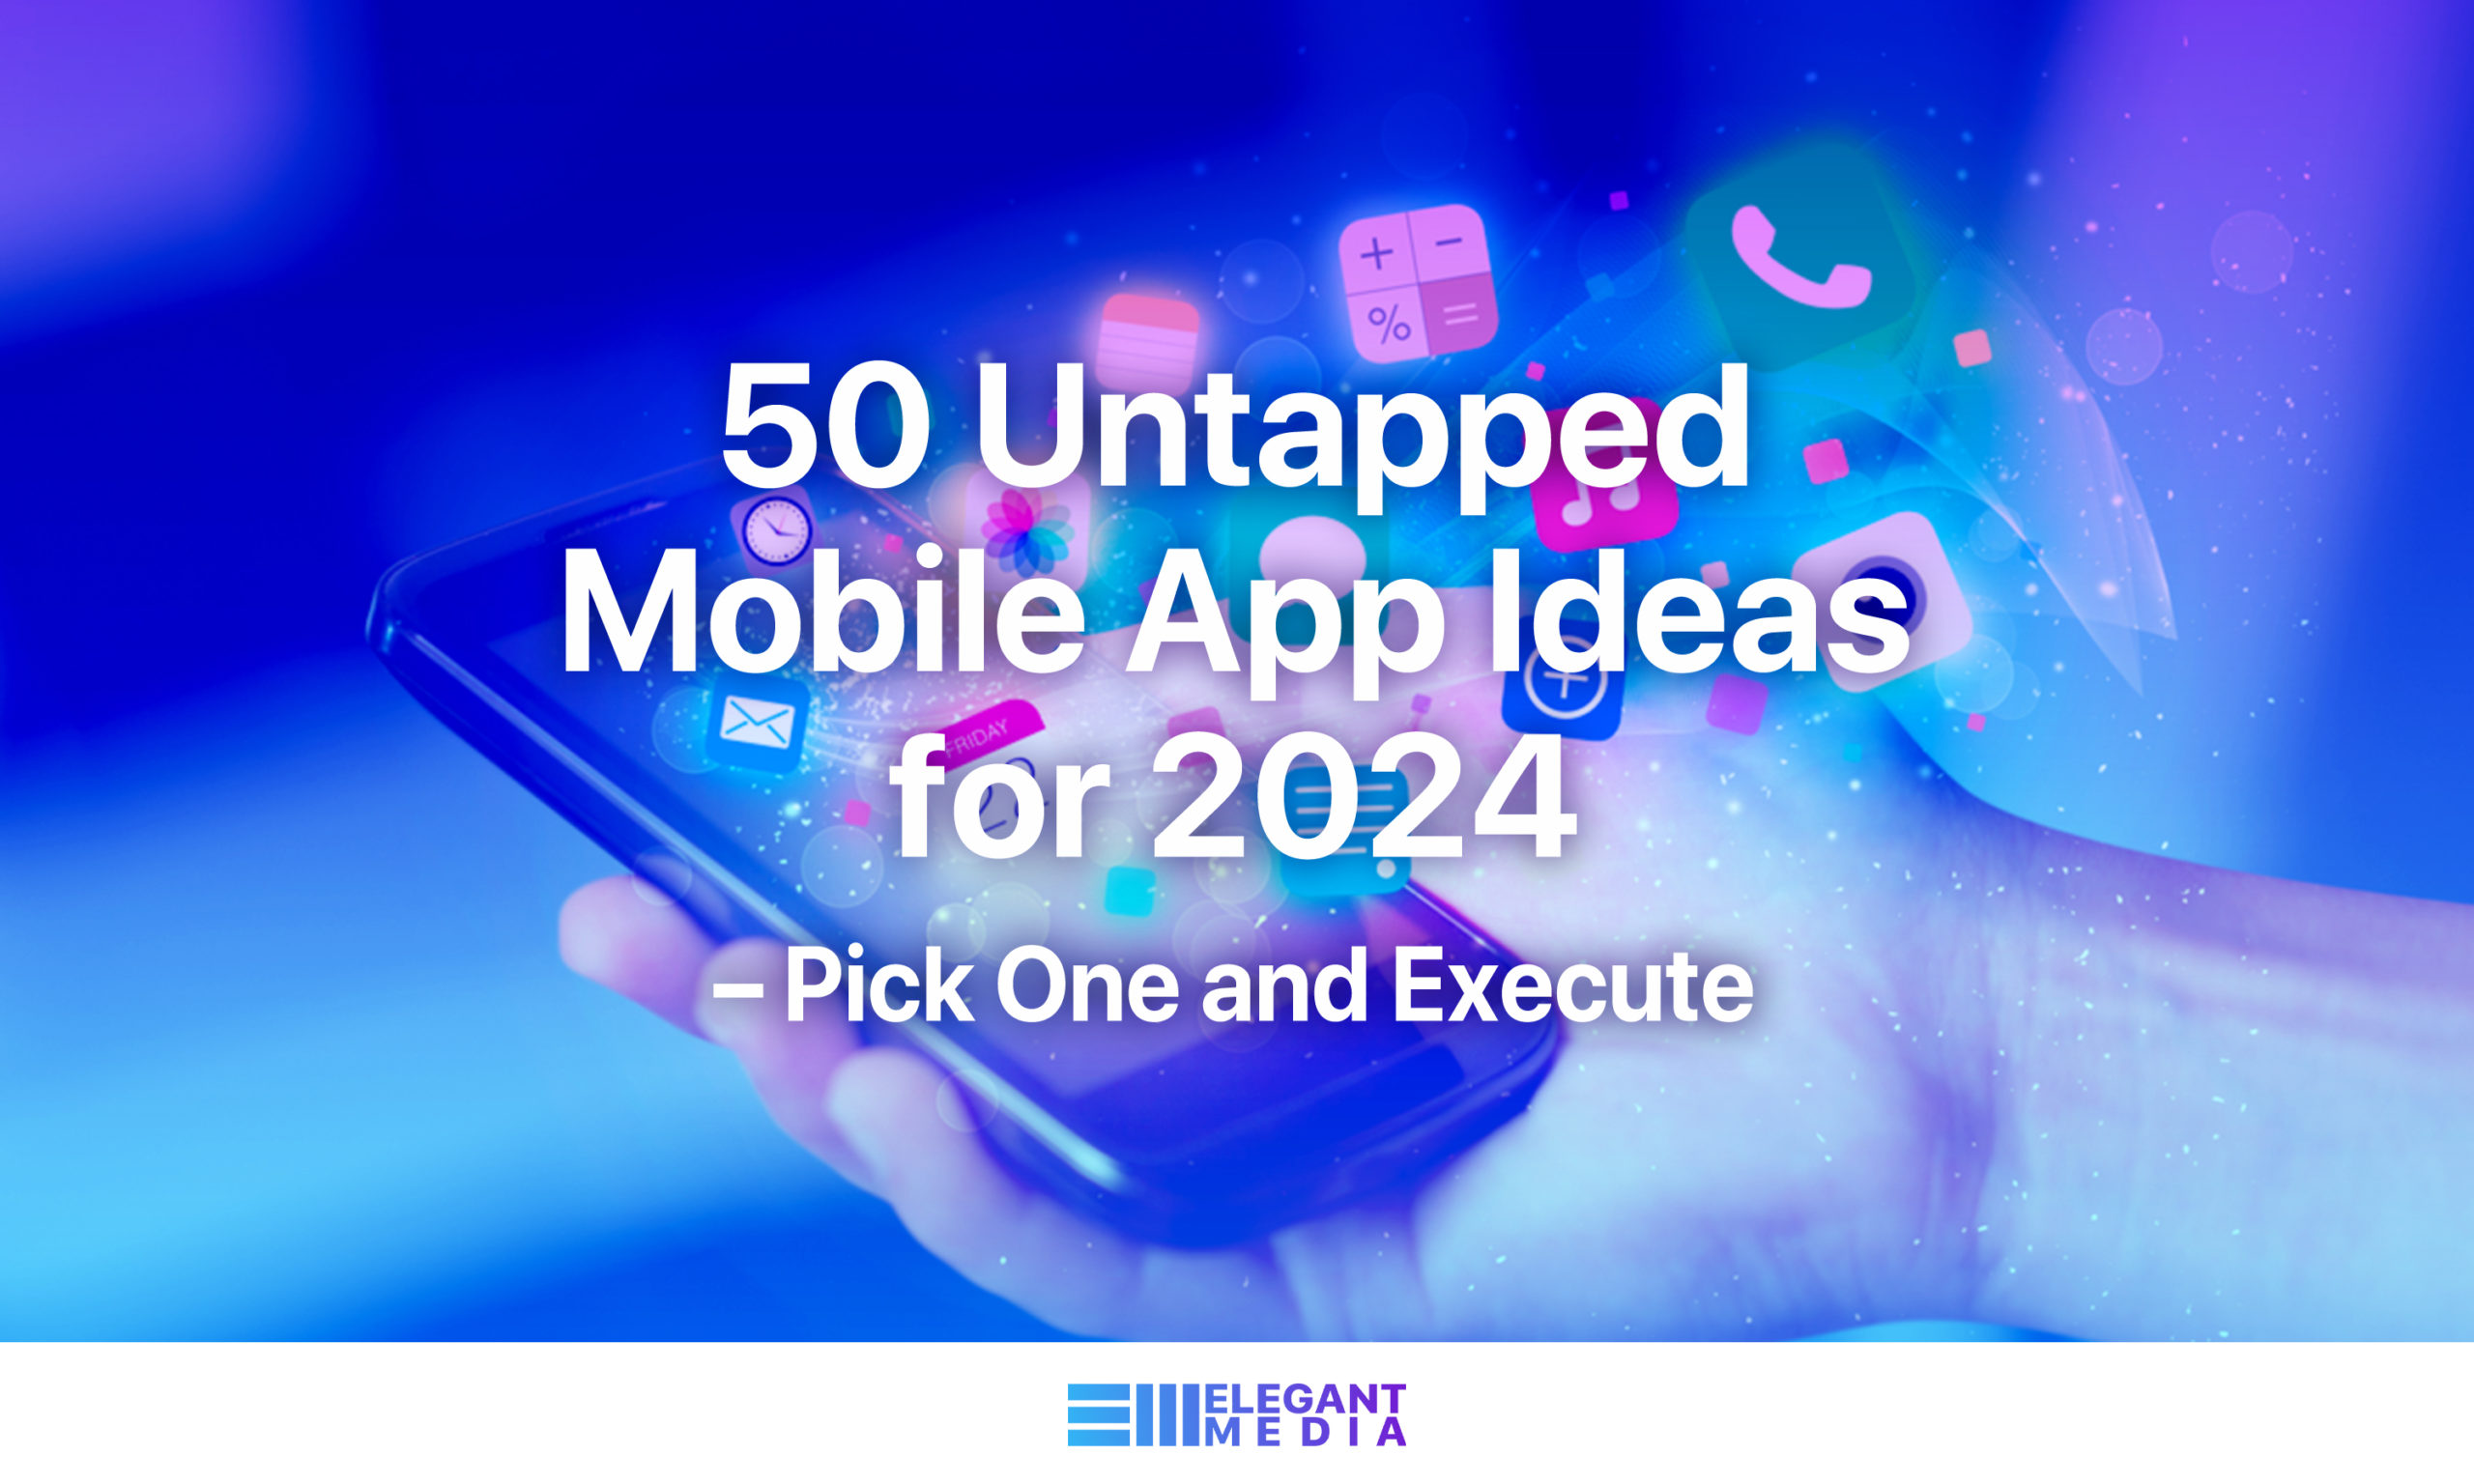 50 Untapped Mobile App Ideas for 2024 – Pick One and Execute